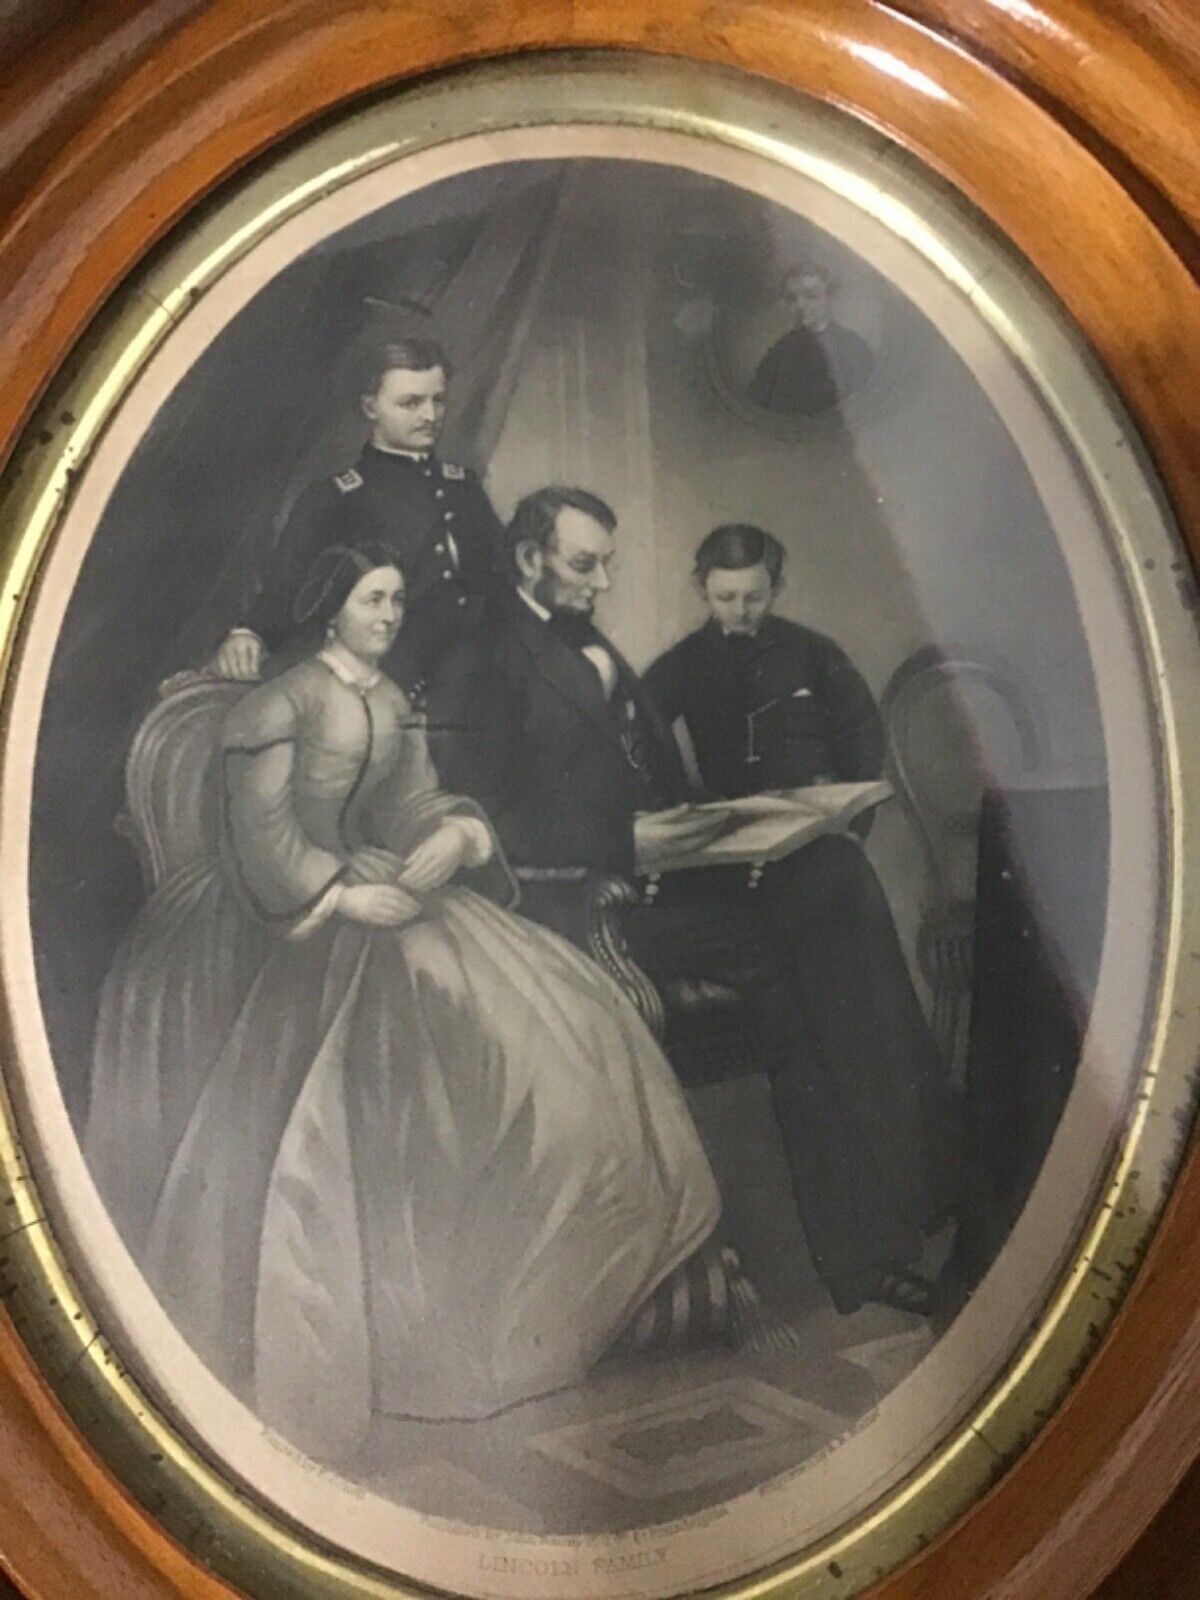 Lincoln Family in Original Beautiful Frame Published by John Dainty 15 S6th St